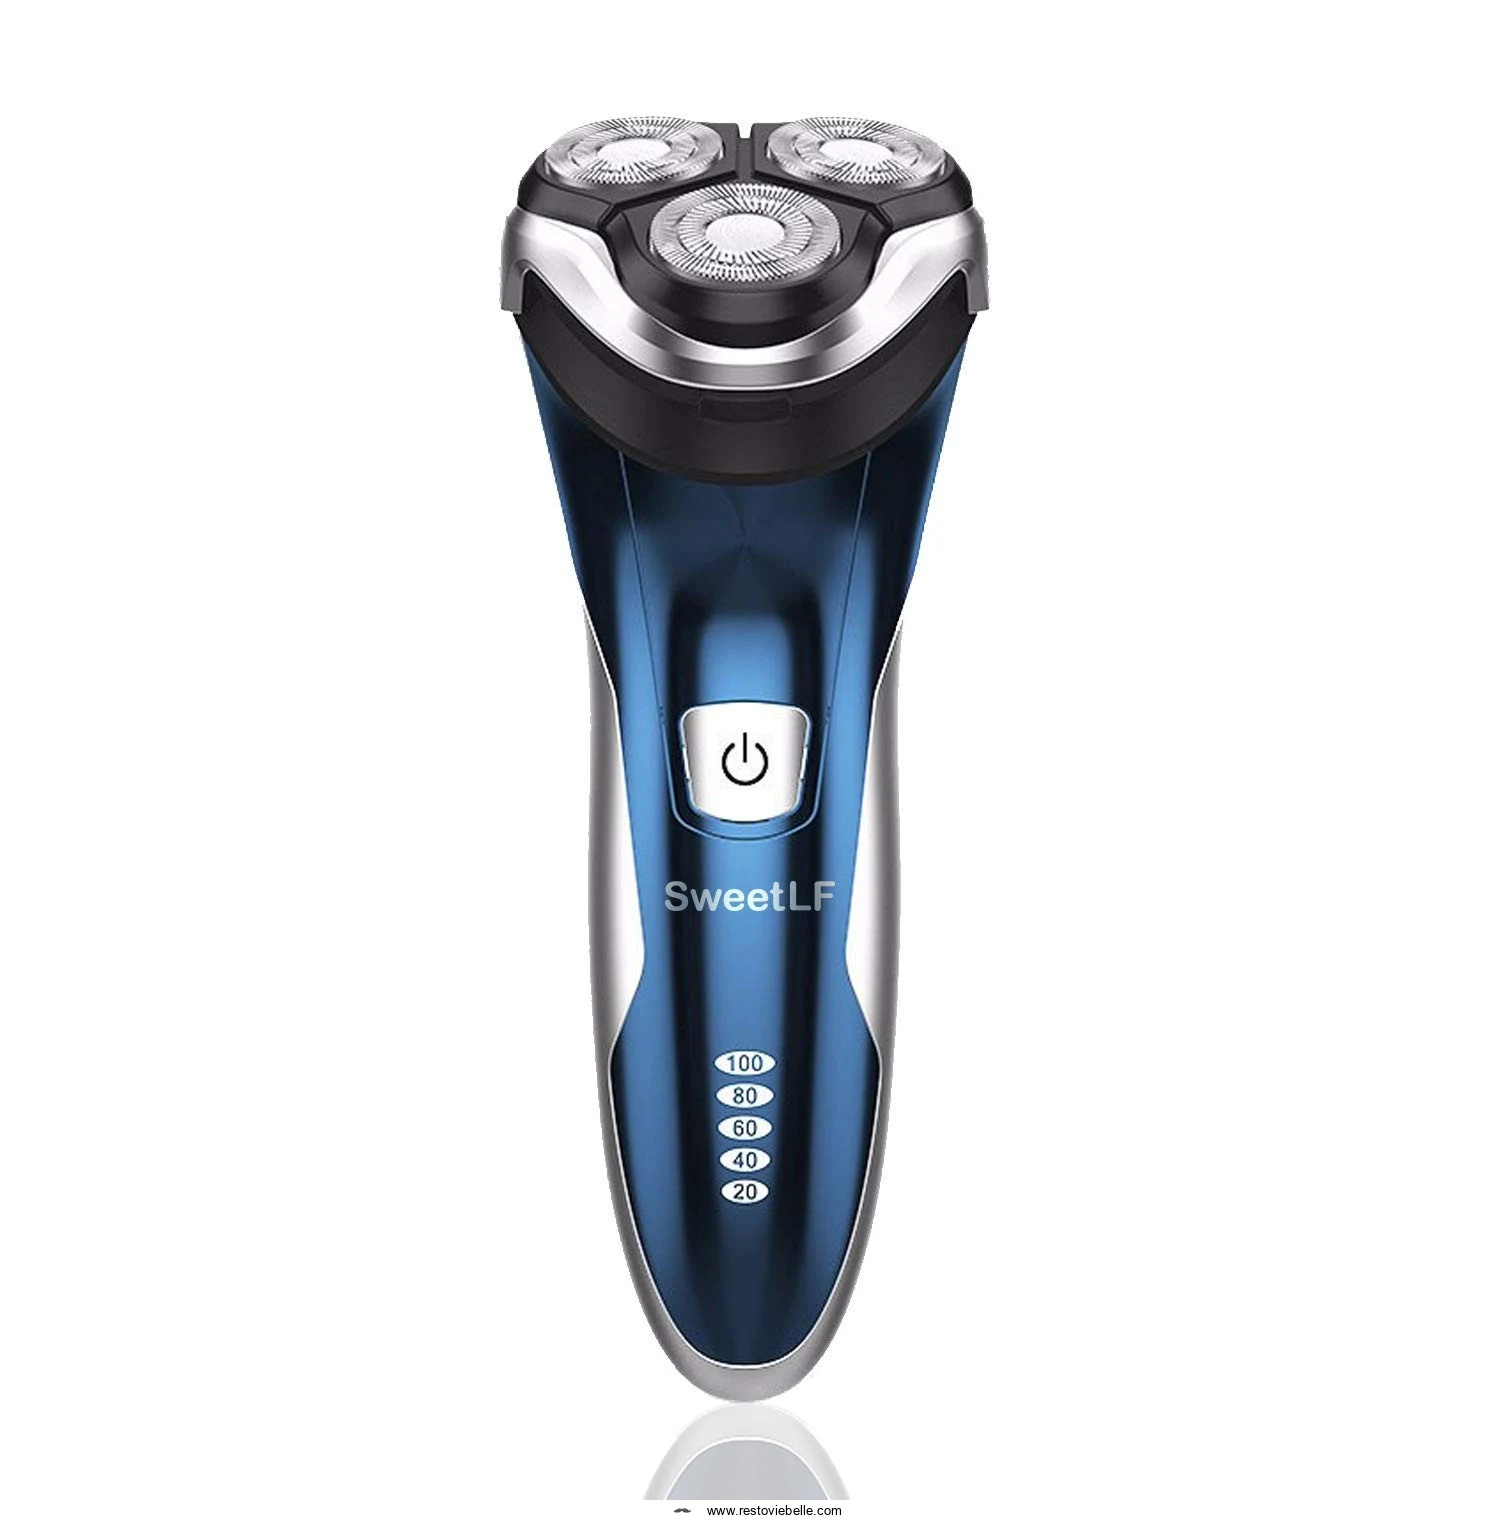 Sweetlf 3d Ipx7 electric shaver under 50